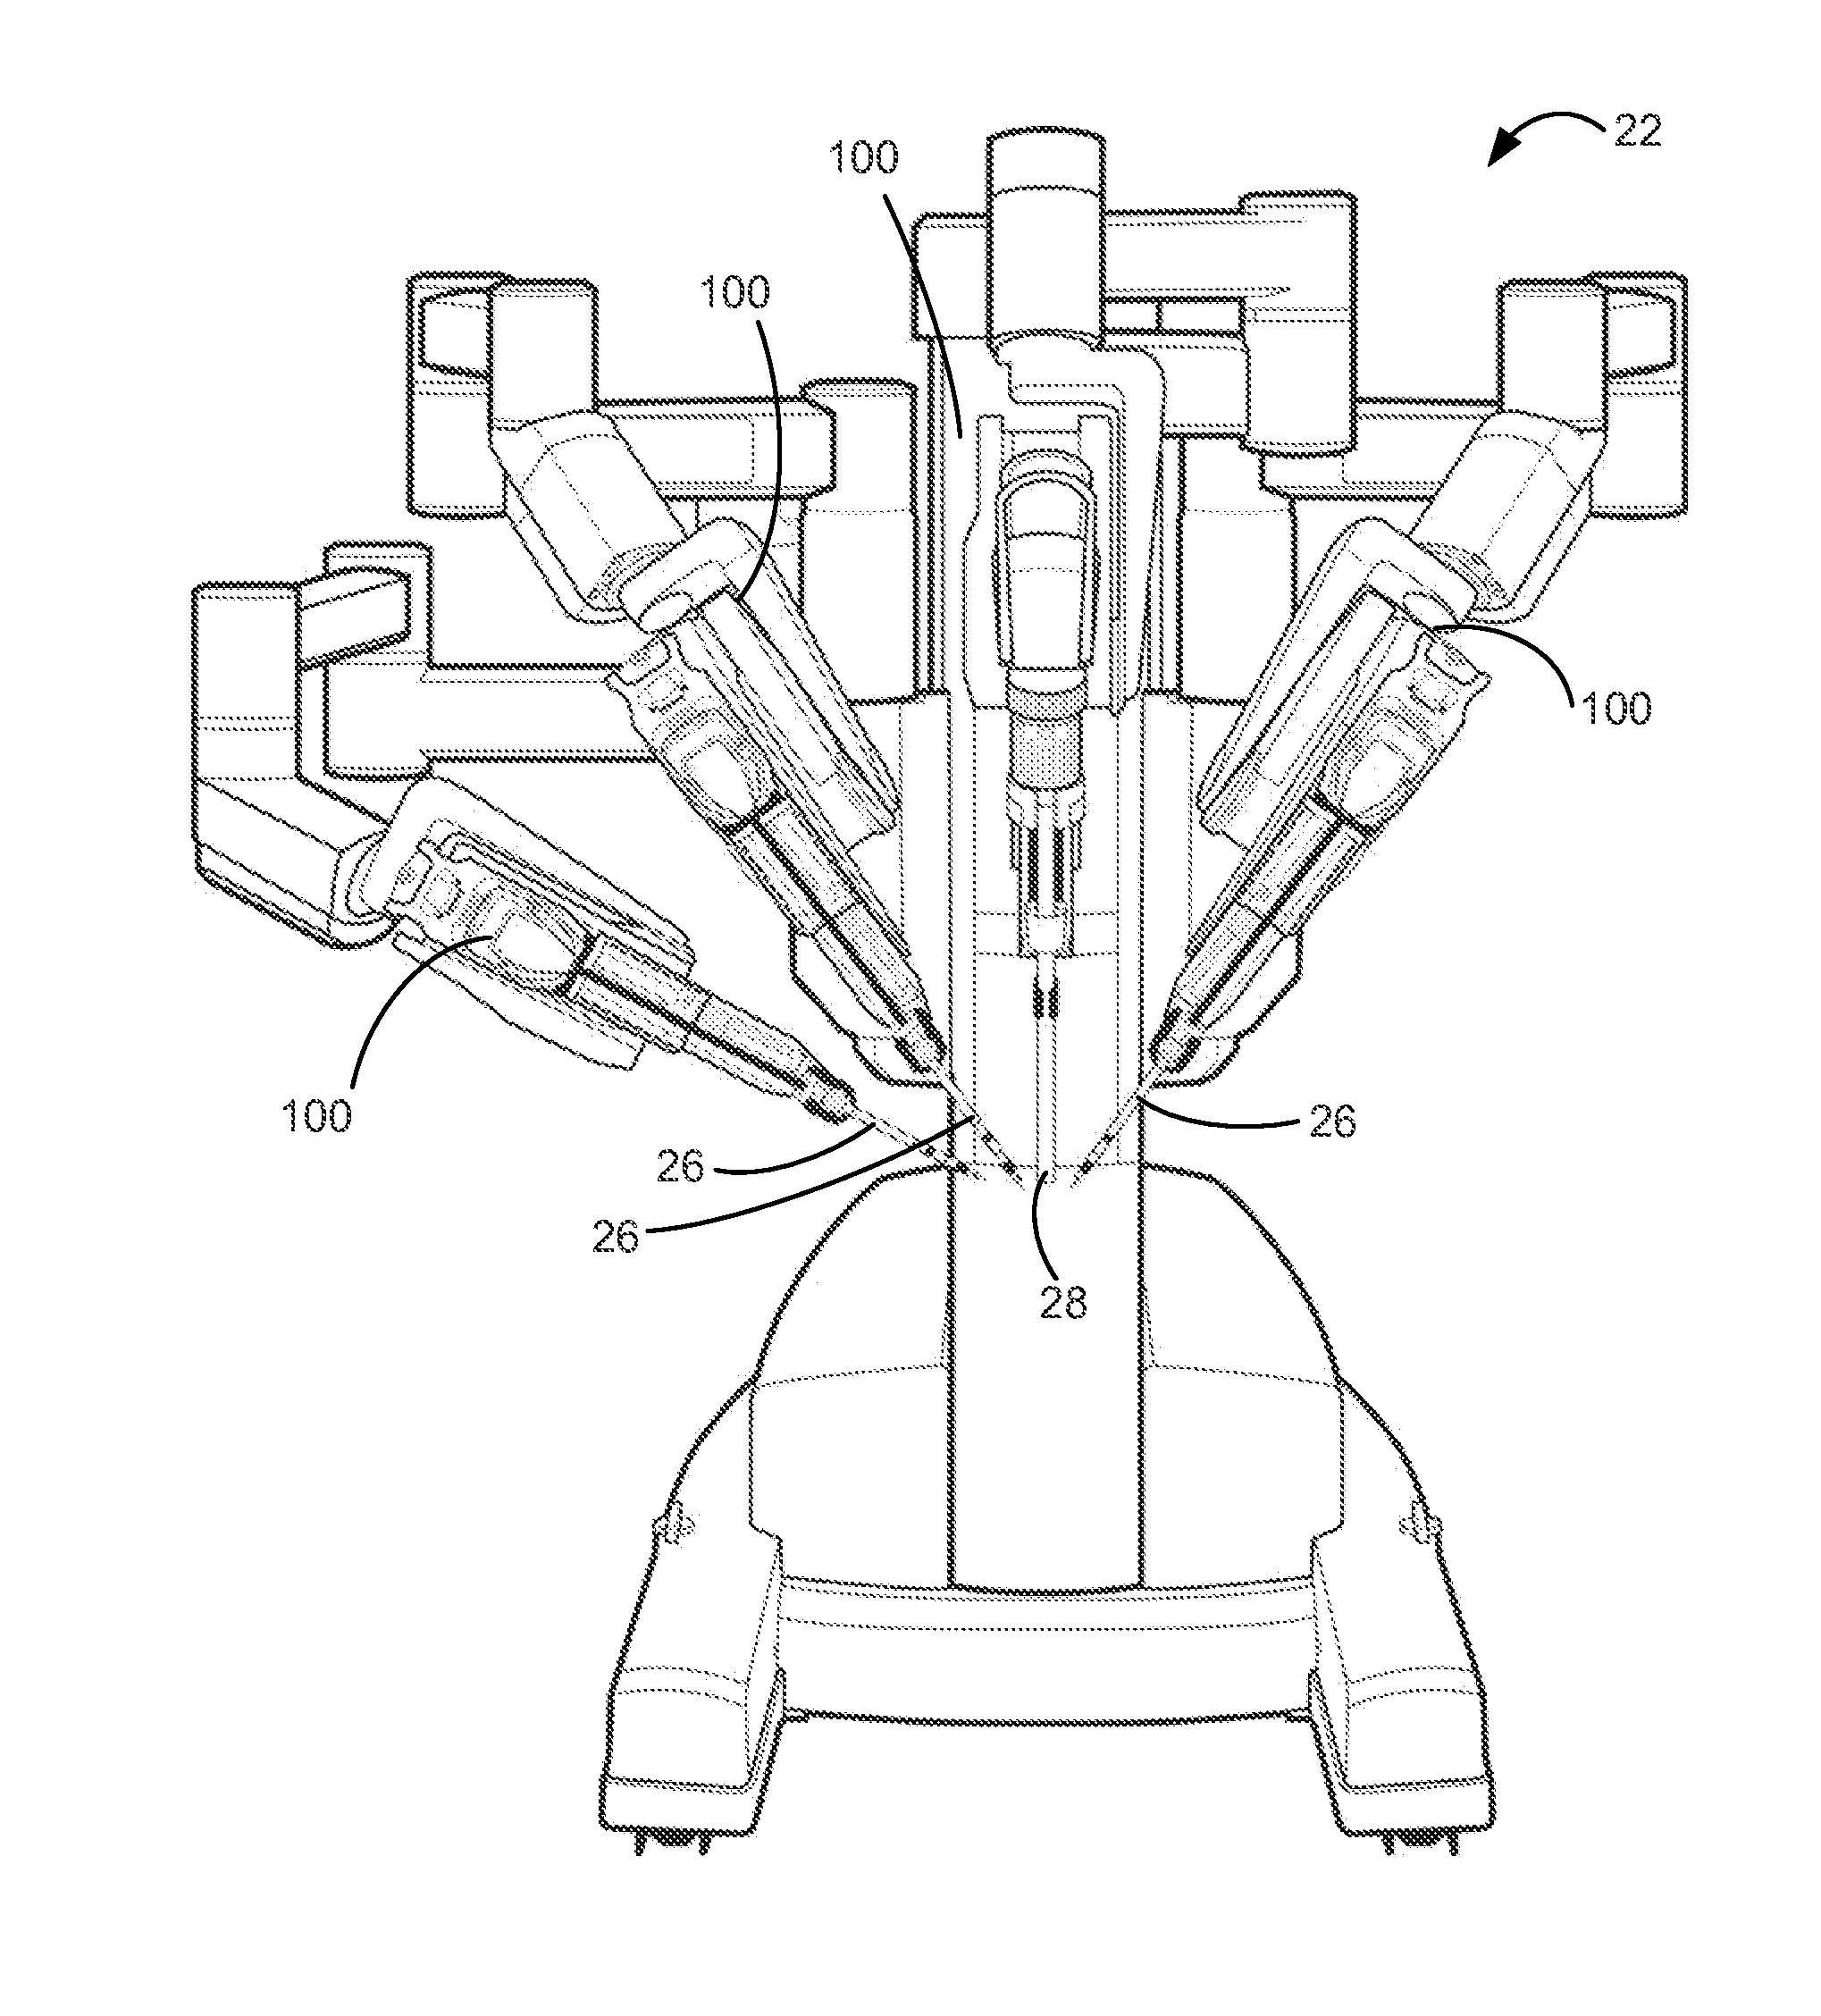 Inter-Operative Switching of Tools in a Robotic Surgical System